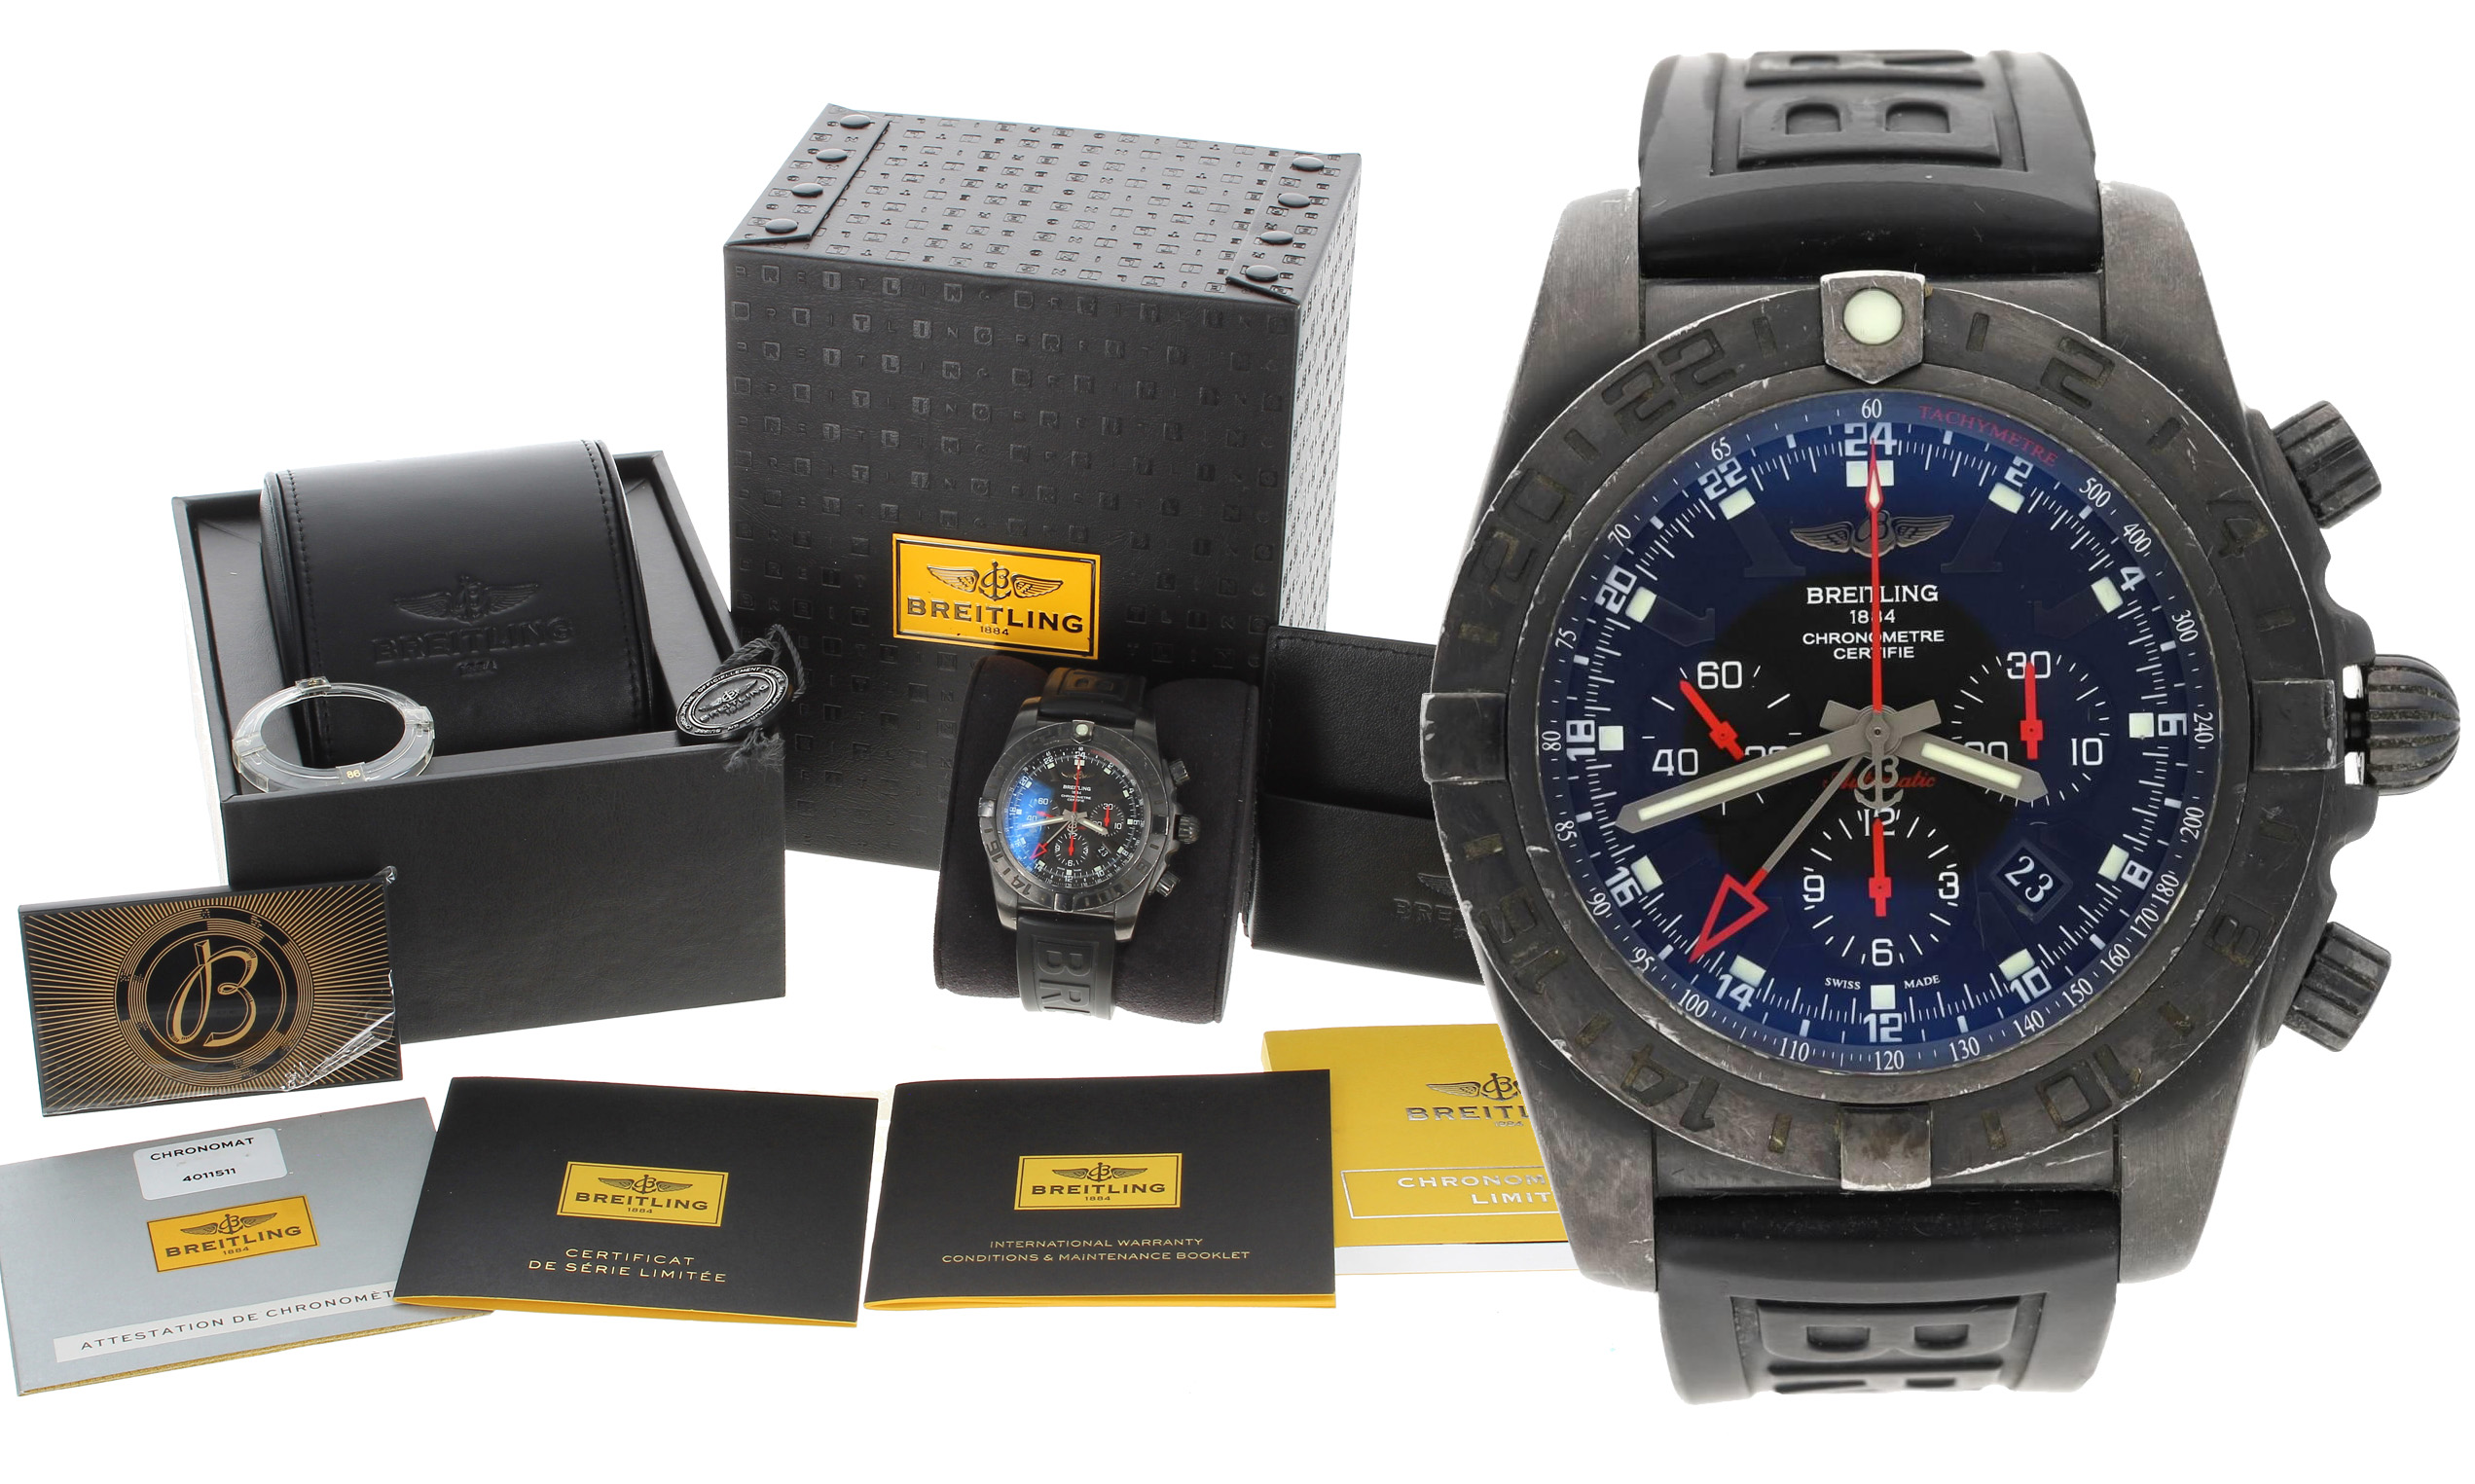 Breitling Chronomat Chronometre GMT limited edition PVD coated automatic stainless steel gentleman's